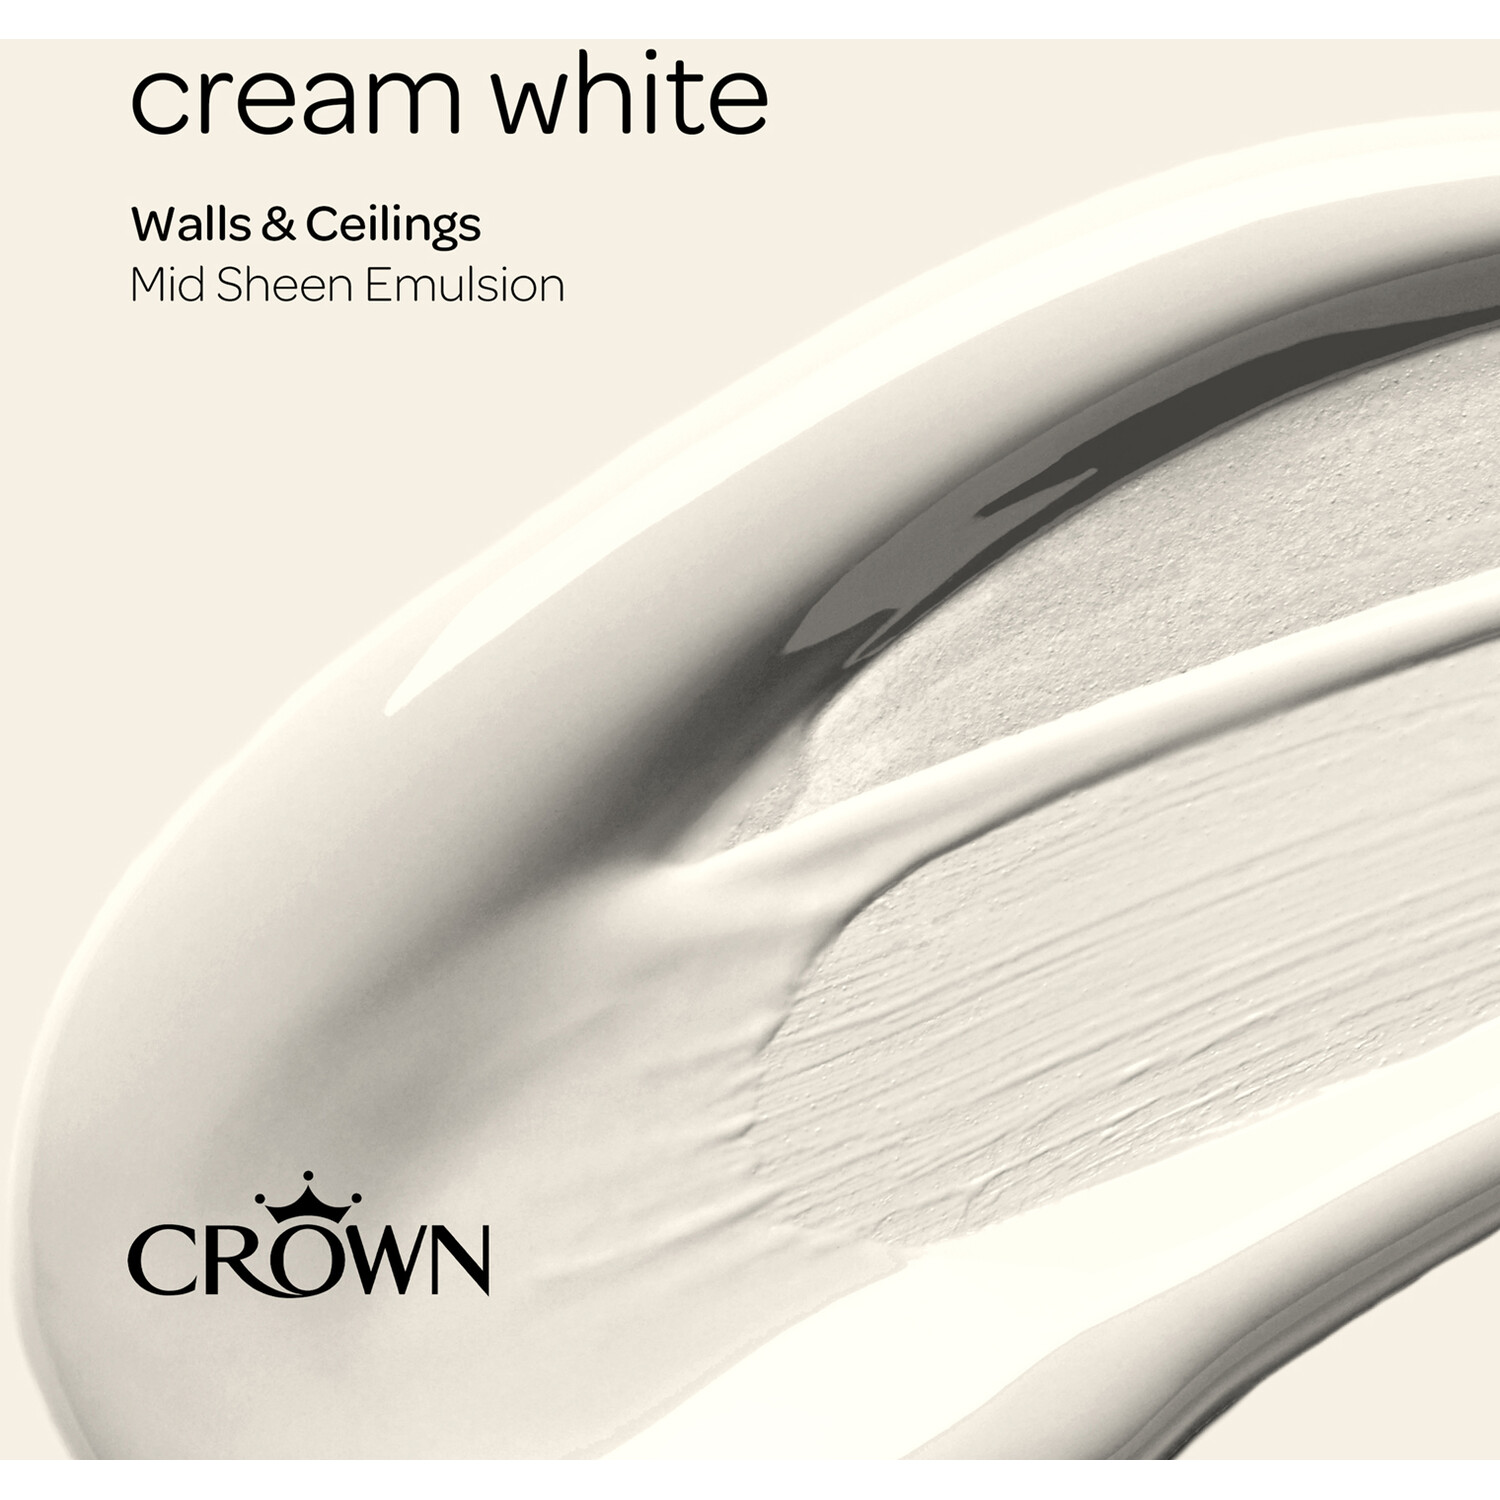 Crown Walls & Ceilings Cream White Mid Sheen Emulsion Paint 2.5L Image 4